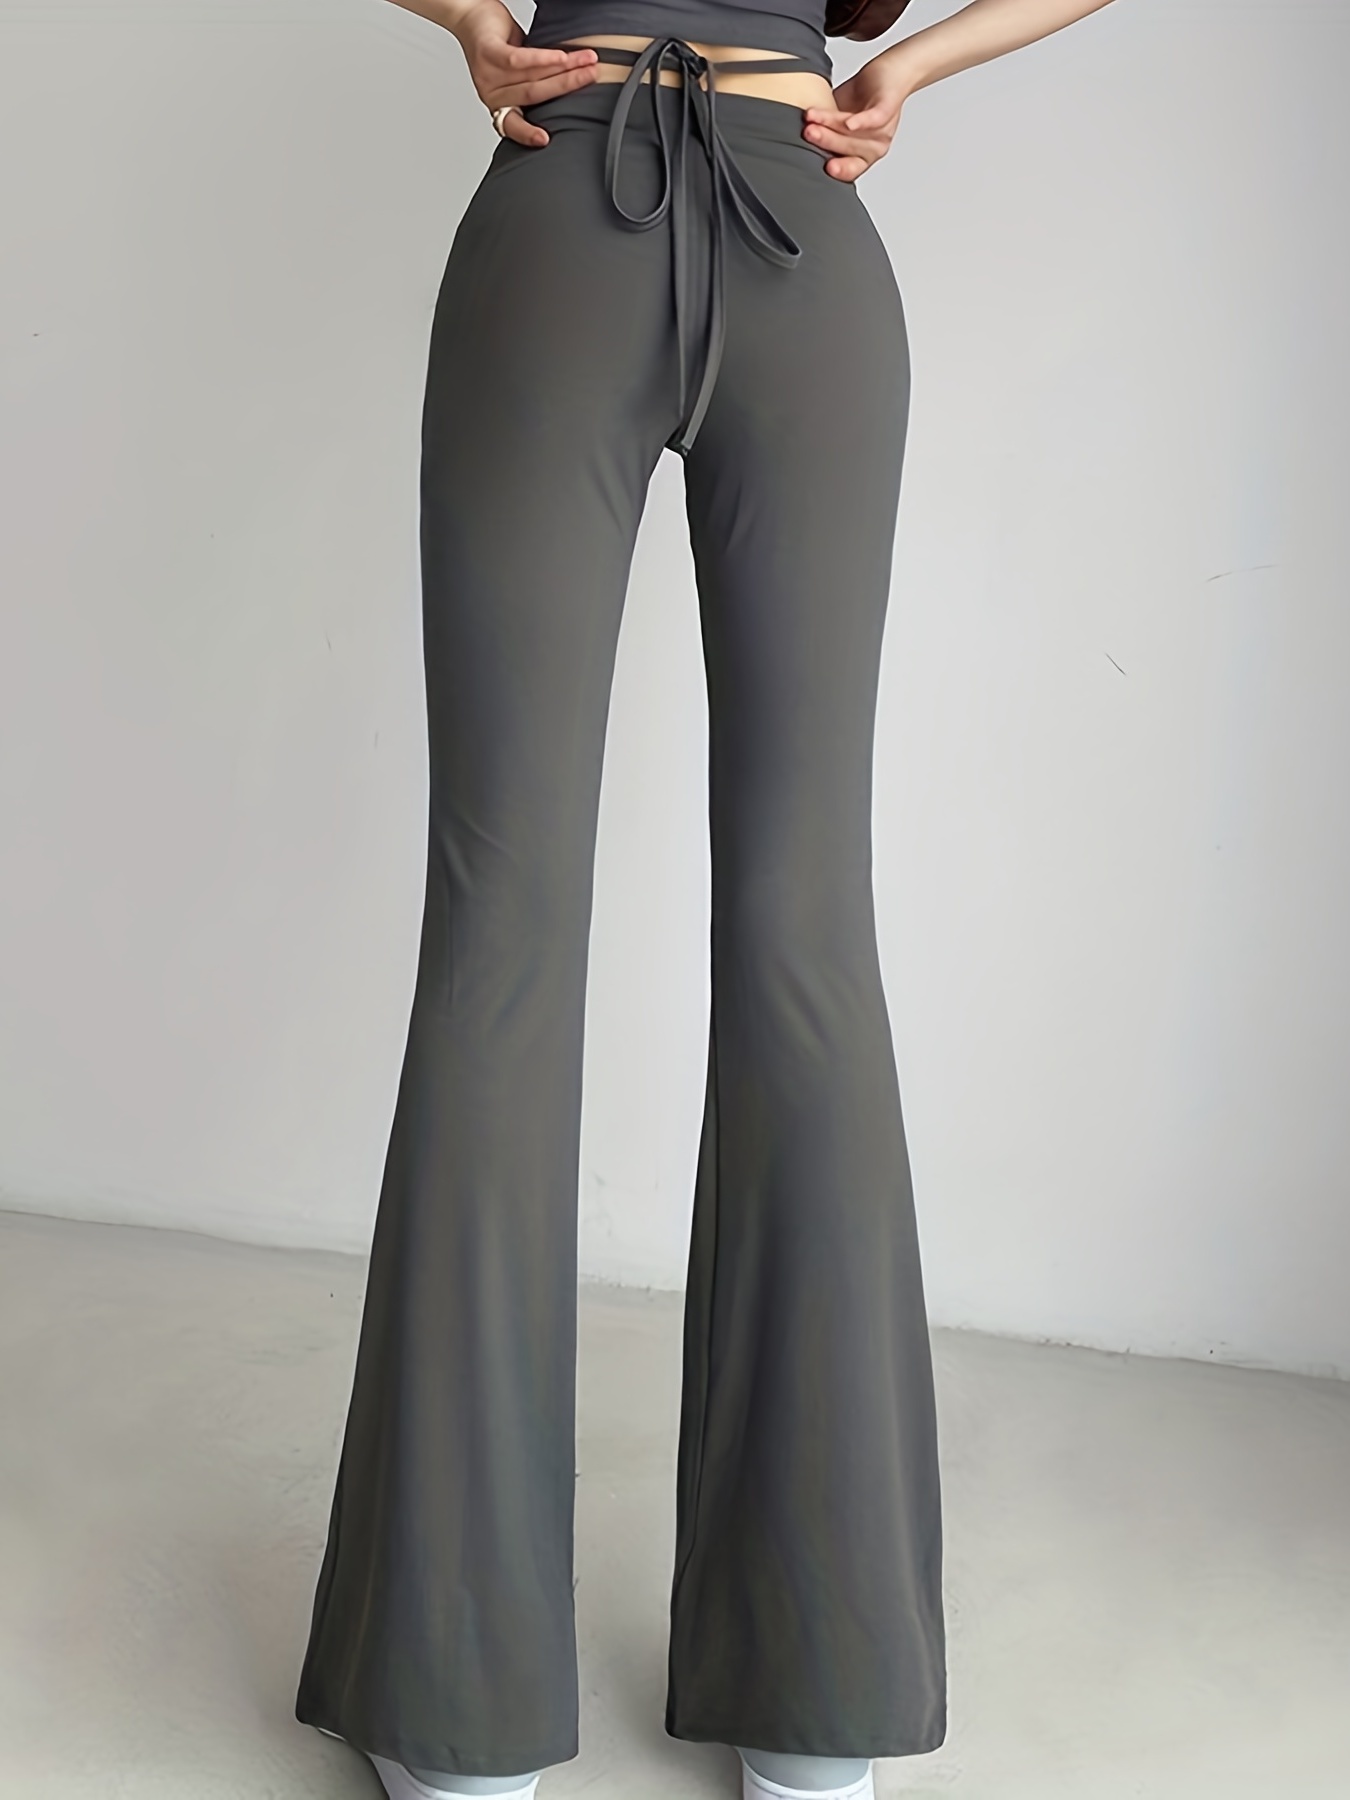 Criss Cross Flare Leggings Sexy Casual Every Day Flare Pants